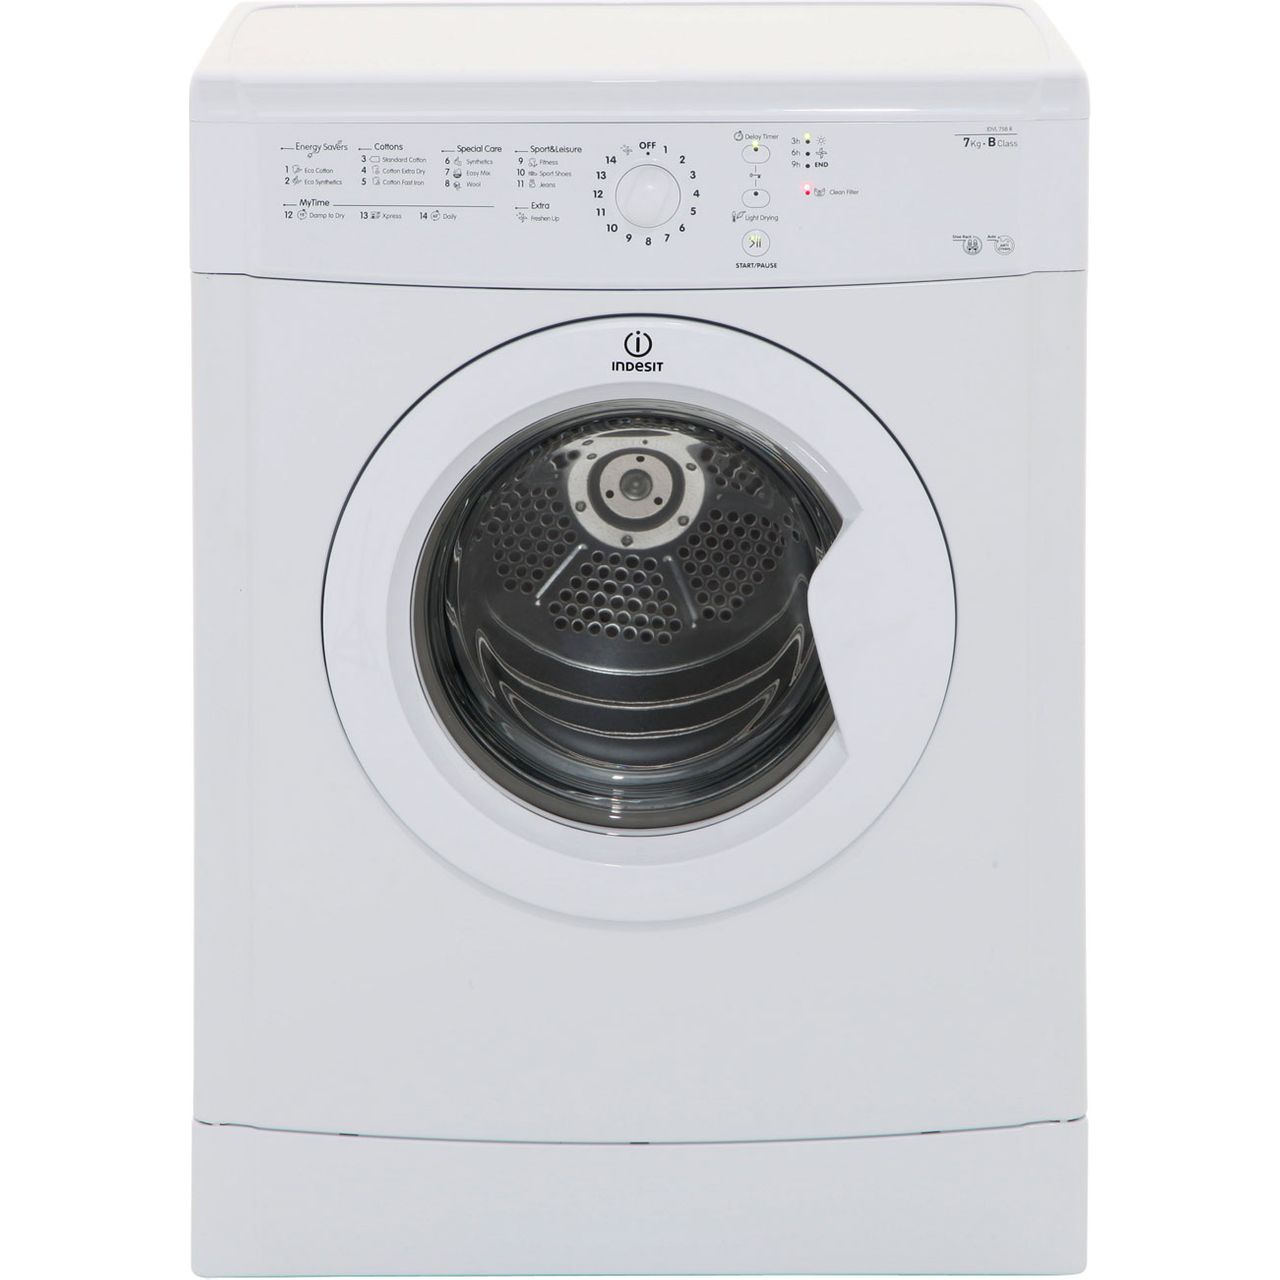 Indesit Eco Time IDVL75BR 7Kg Vented Tumble Dryer Review